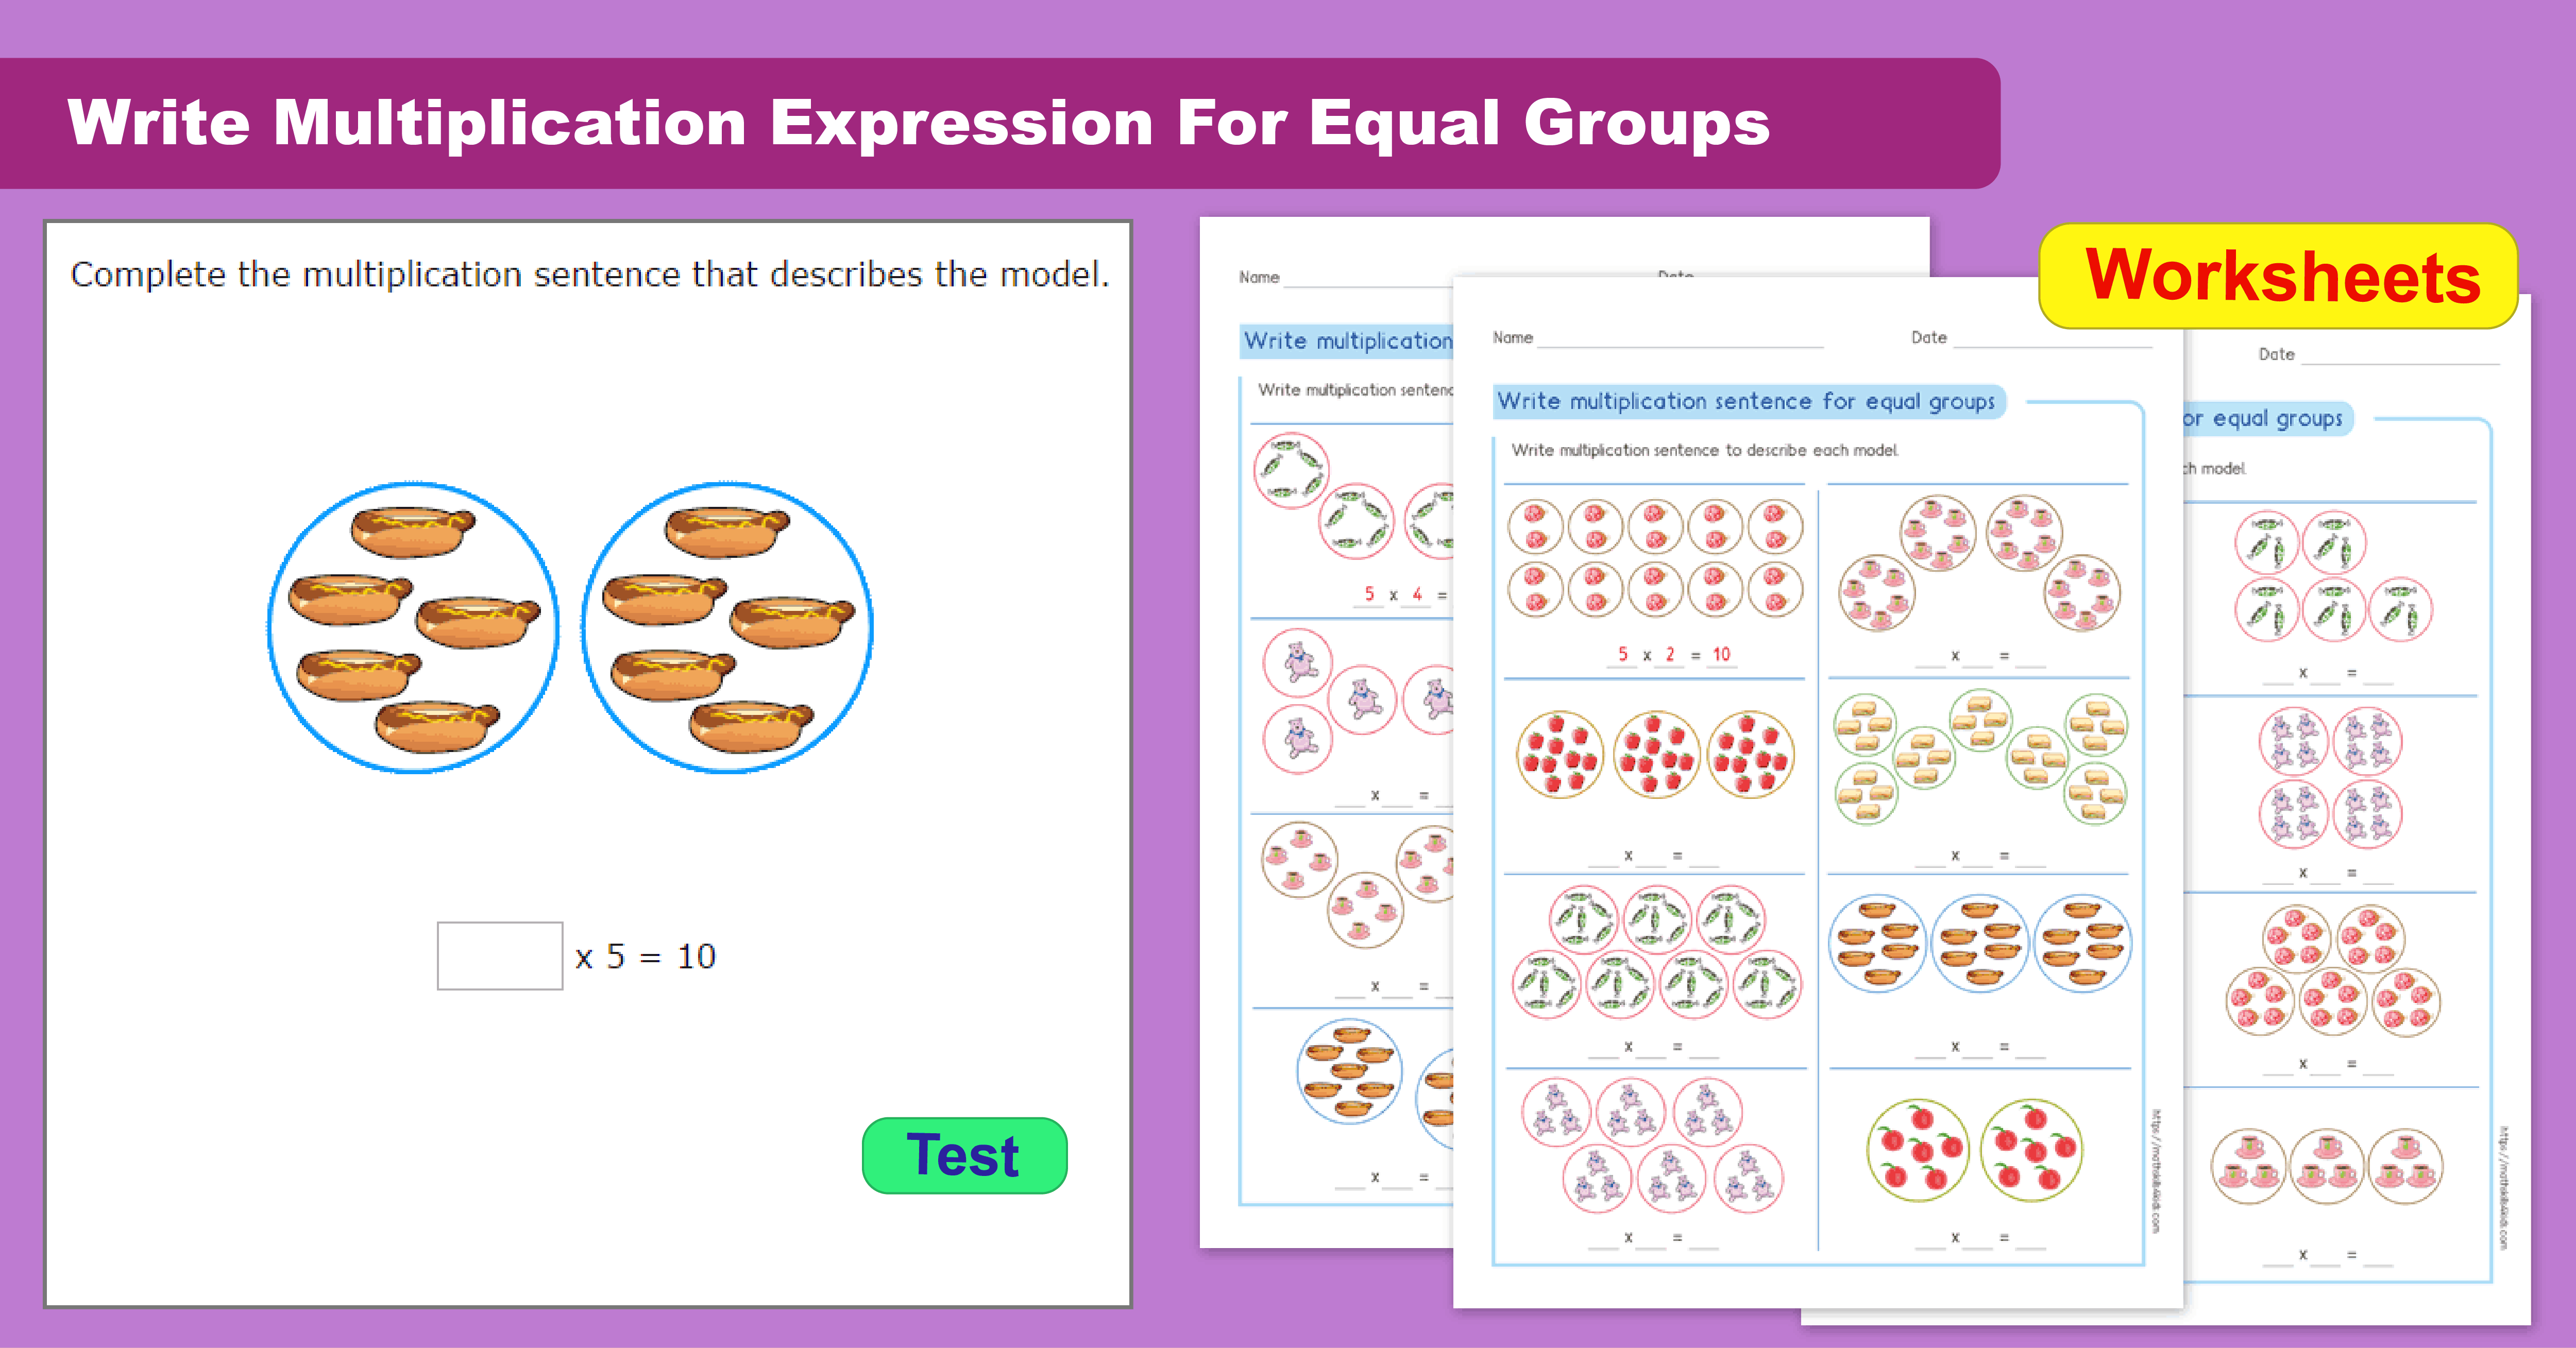 Write multiplication expression for equal groups - Understand Multiplication Concept